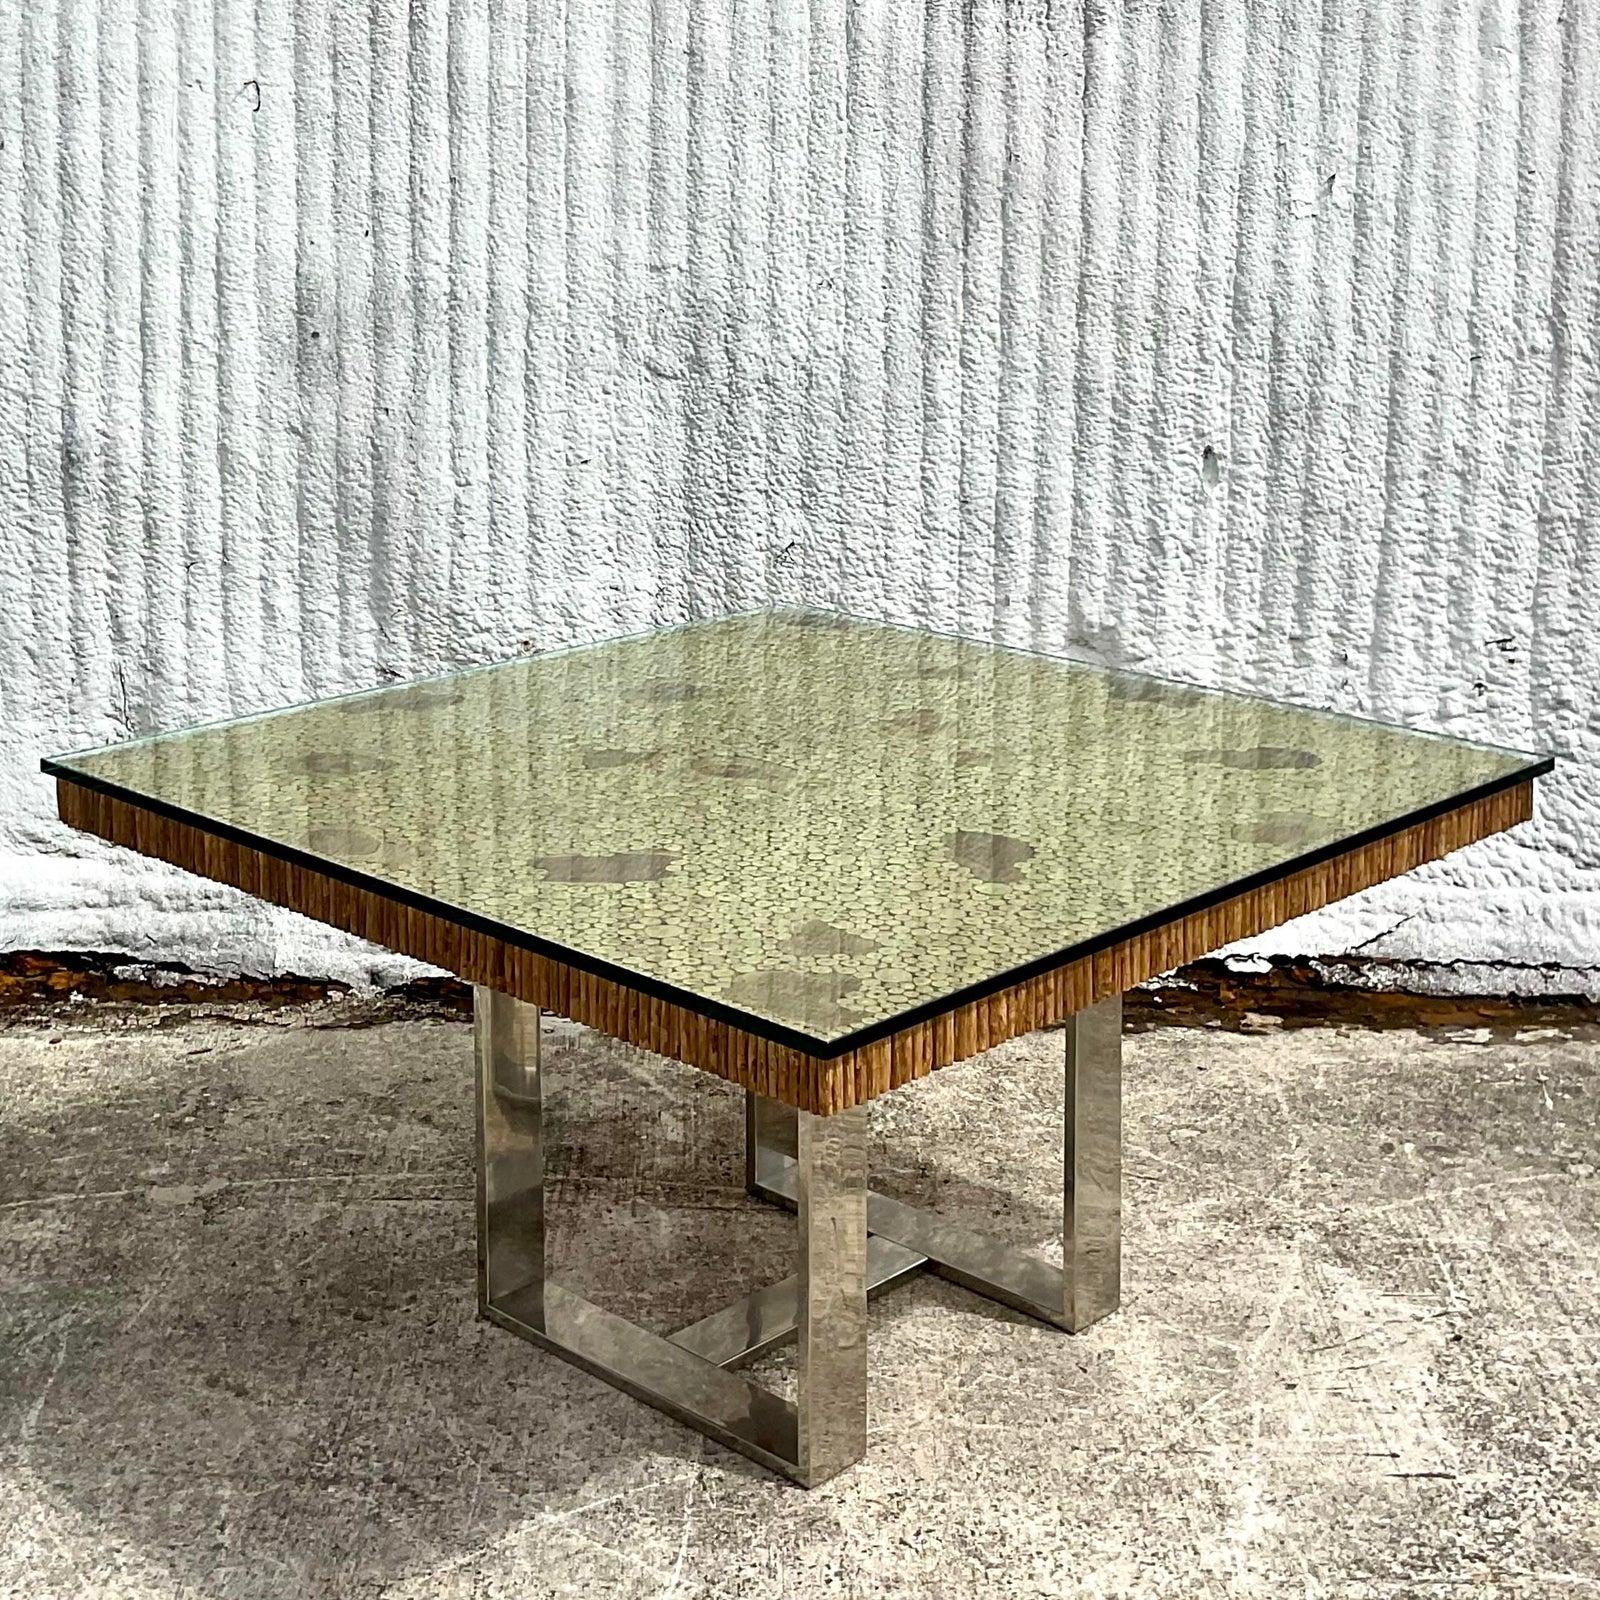 Incredible vintage hand cut branches dining table. Large surge face with individual slices of branches. Beautiful wood grain detail with a ring of branches along the edge. A super thick sheet of glass included. Rests on a flat bar polished chrome